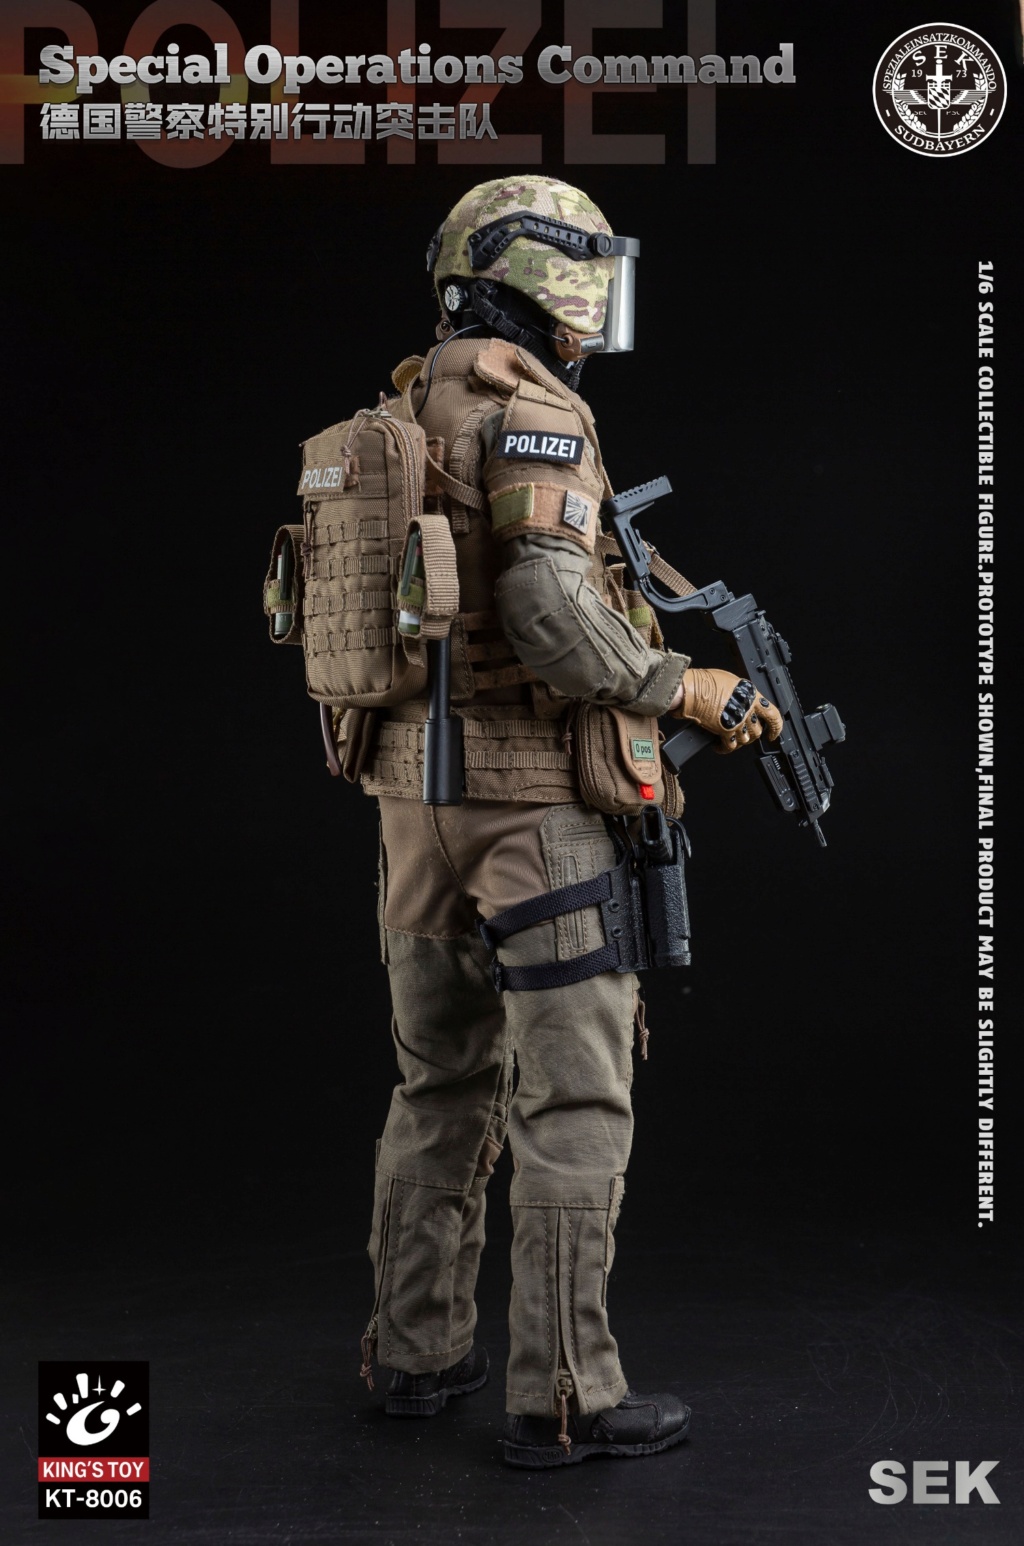 ModernMilitary - NEW PRODUCT: King's Toy #KT-8006 1/6 Scale Special Operations Command SEK 09241111